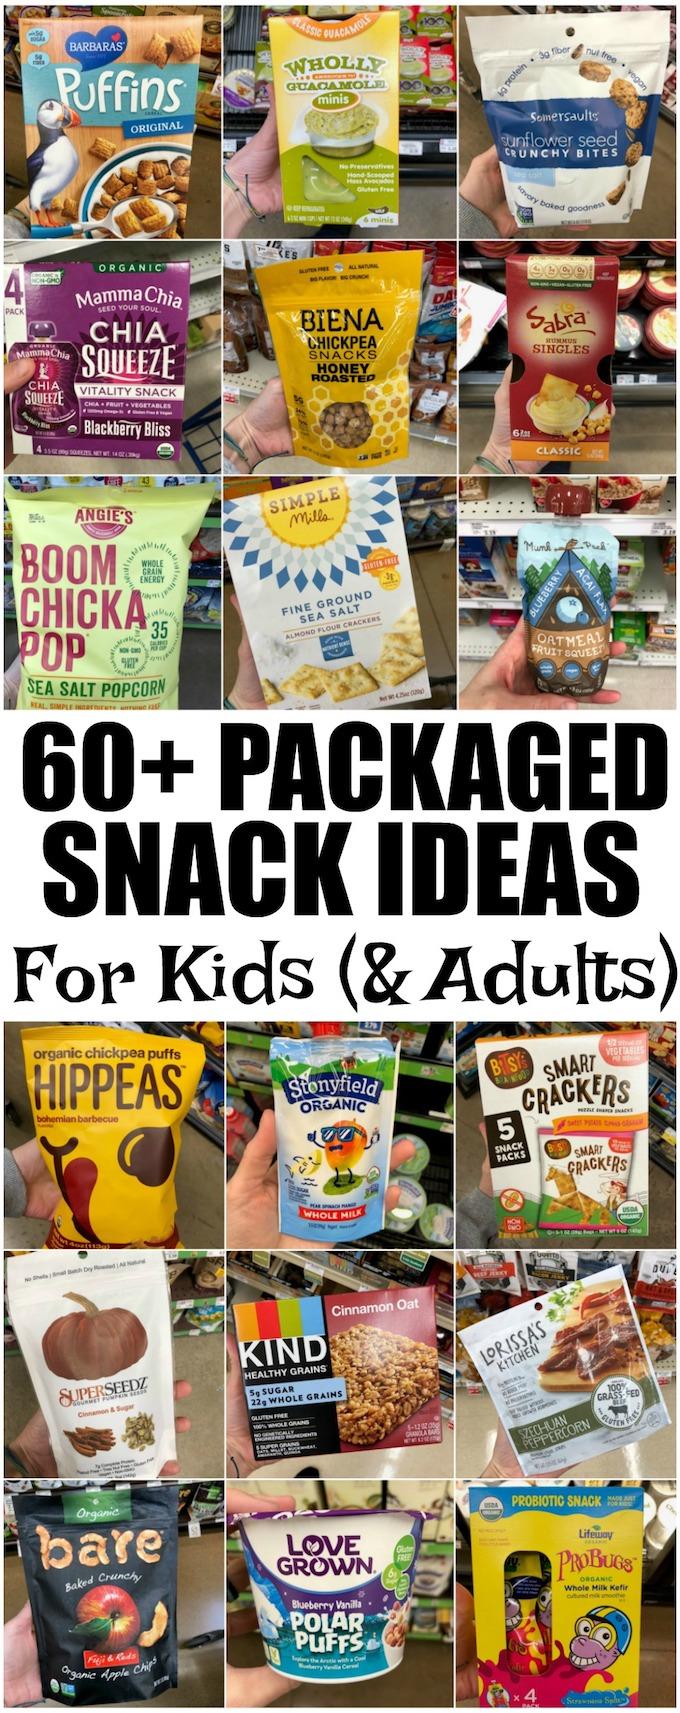 This list of healthy packaged snacks for kids (and adults too!) is meant to provide inspiration for busy parents who are looking for some new ideas. Homemade snacks are great but there are also some good store-bought options available!